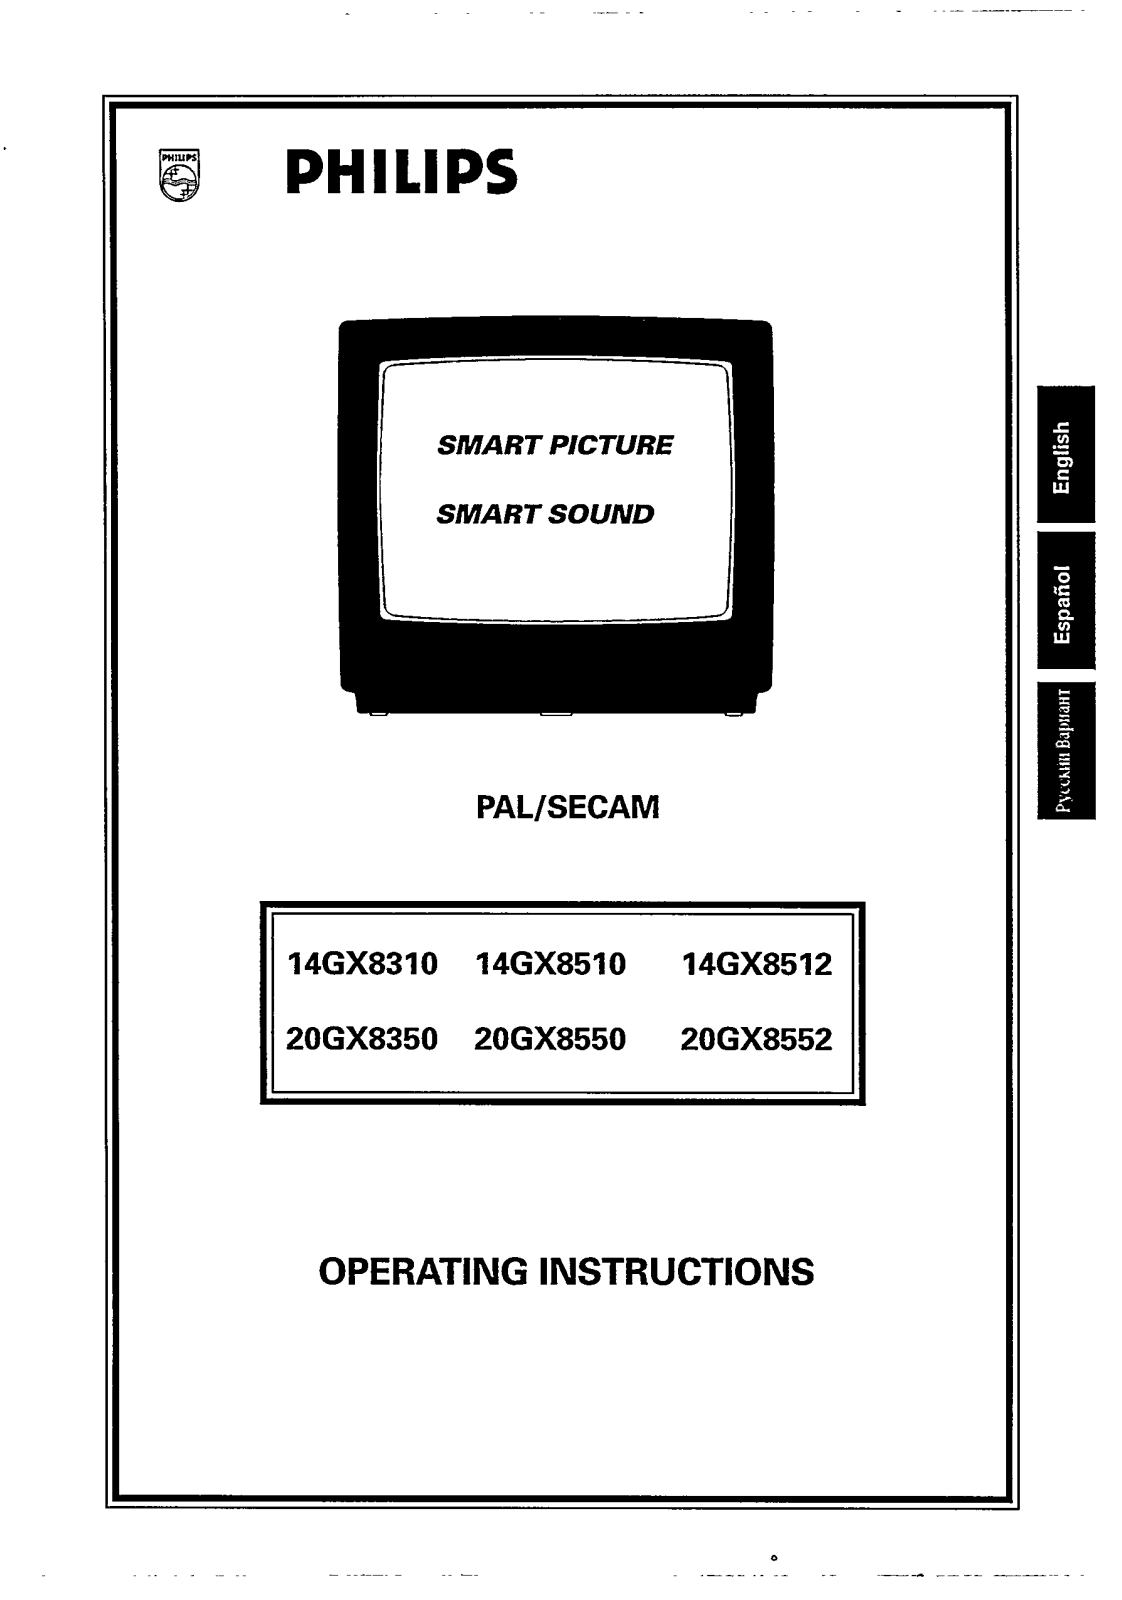 Philips 20gx8550 Operating instructions